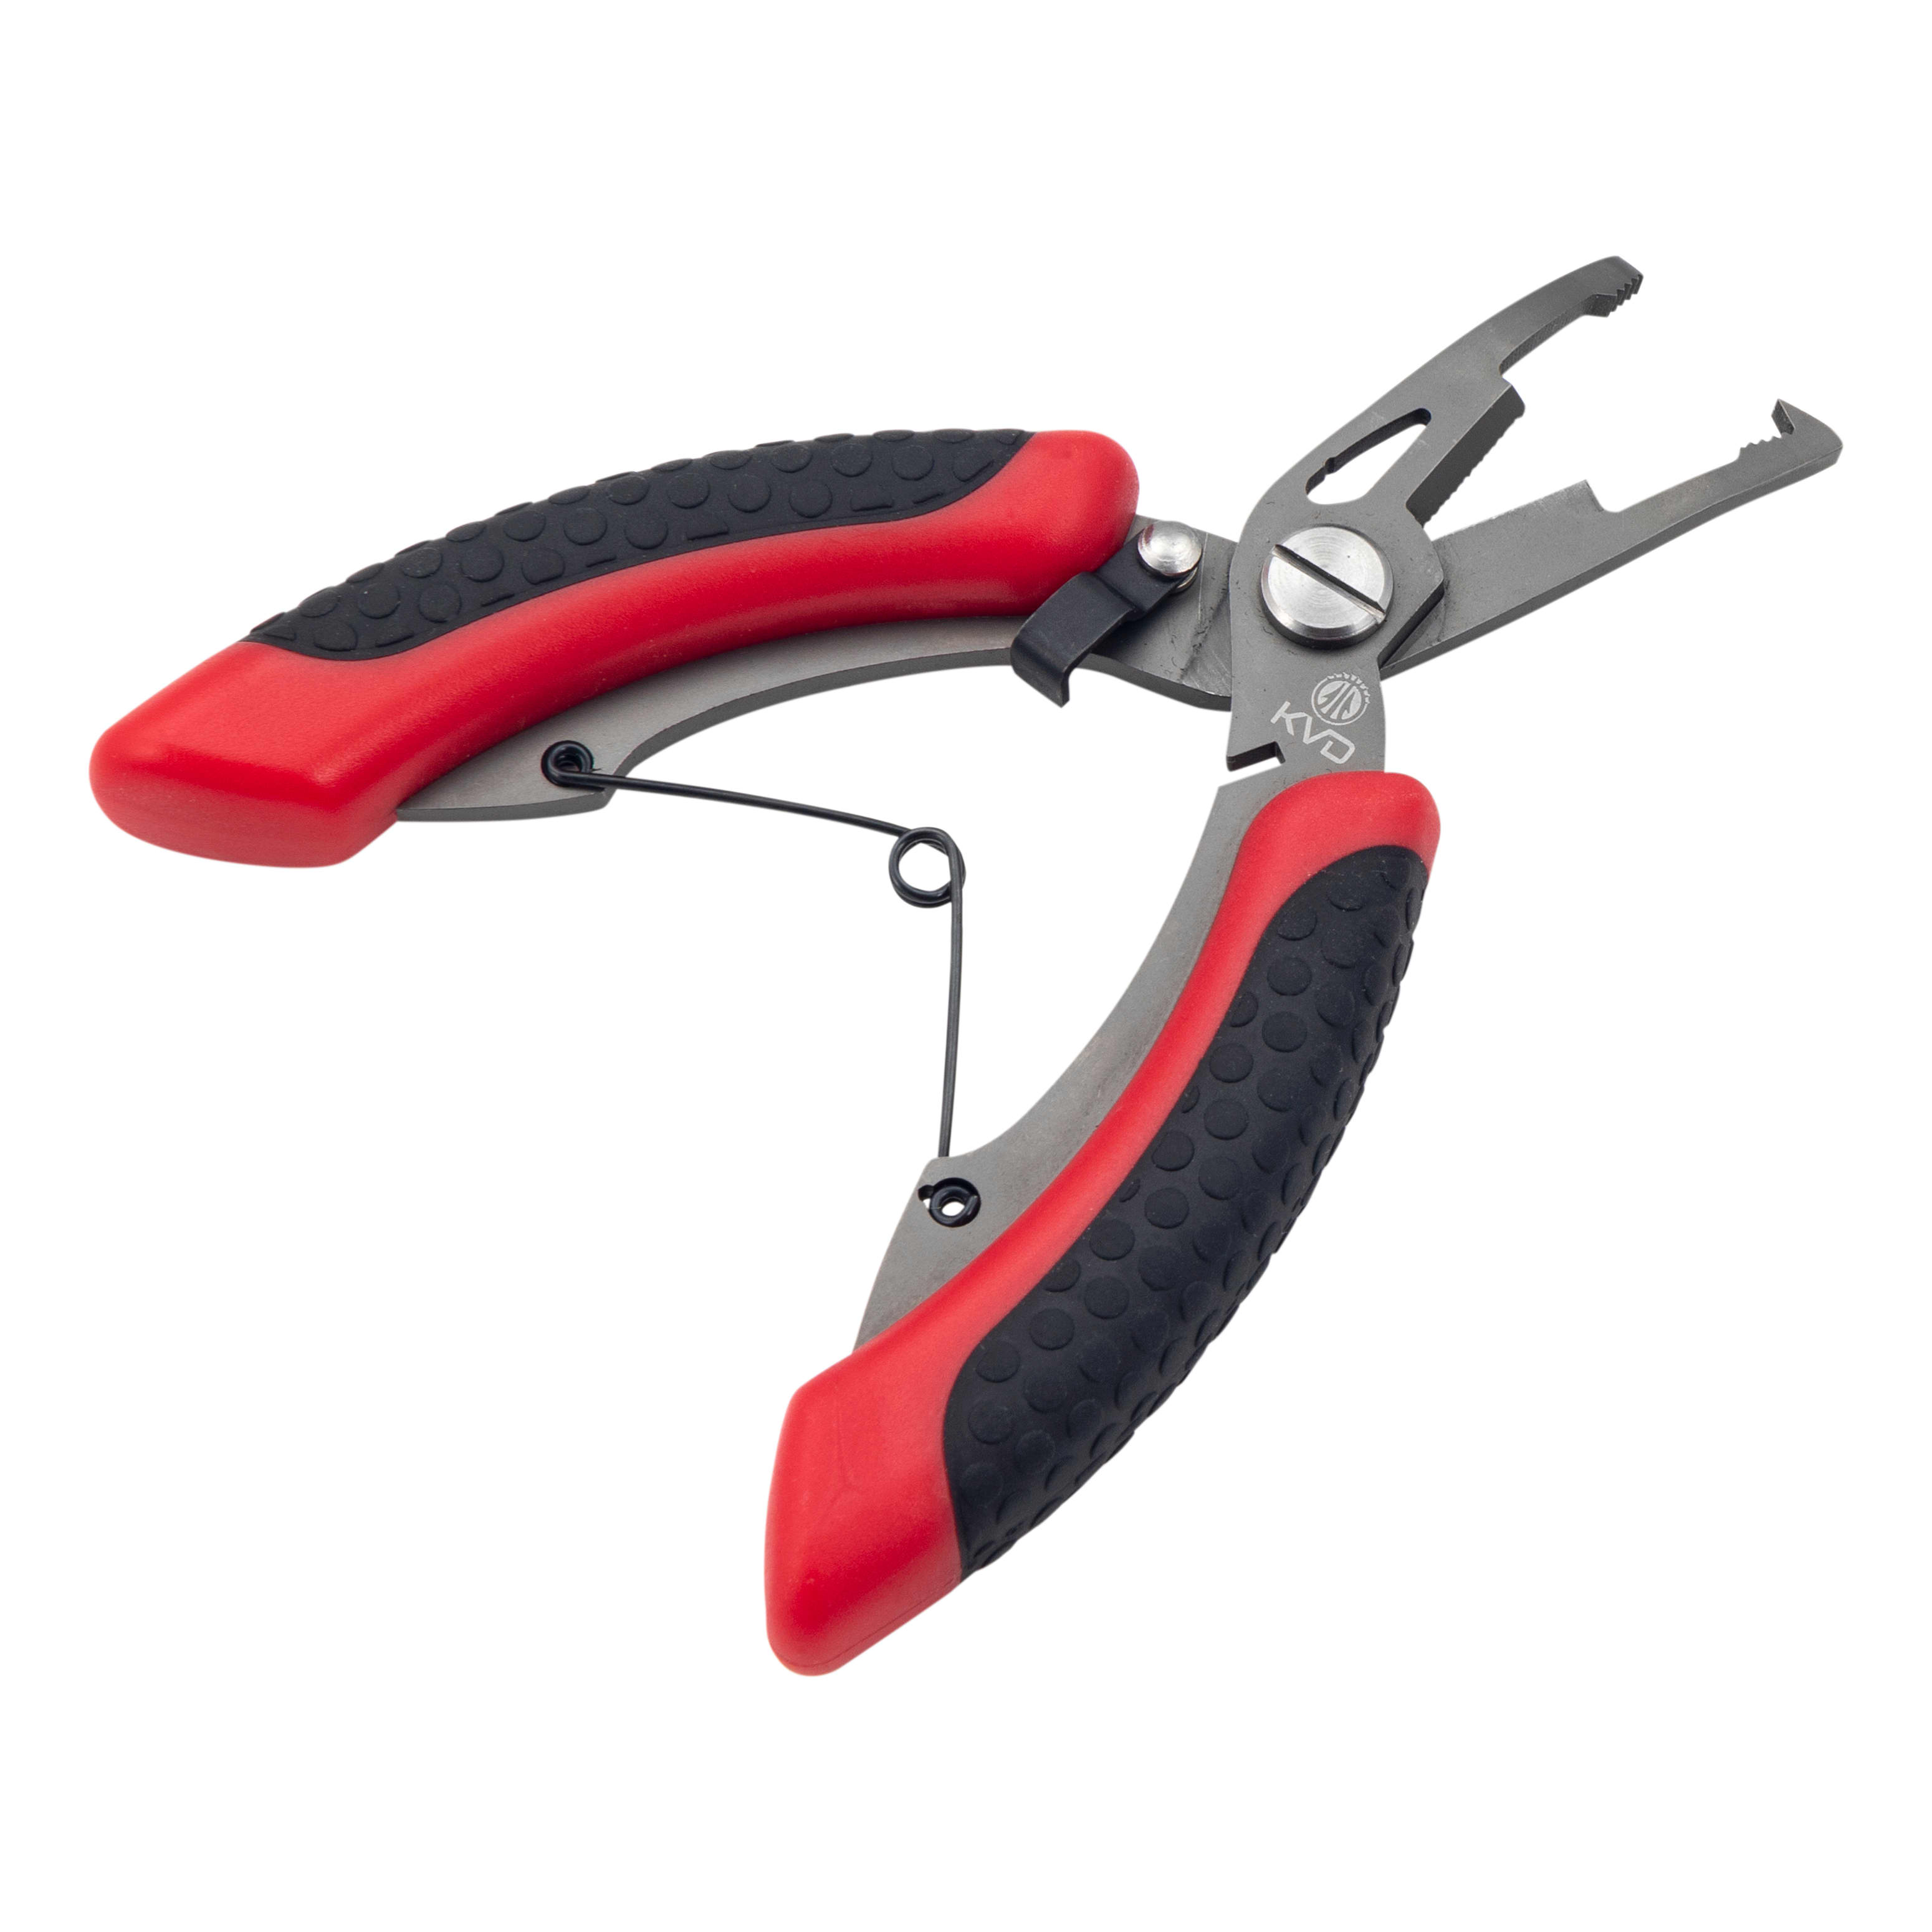 About VMC Crossover pliers and rings for wacky rigging